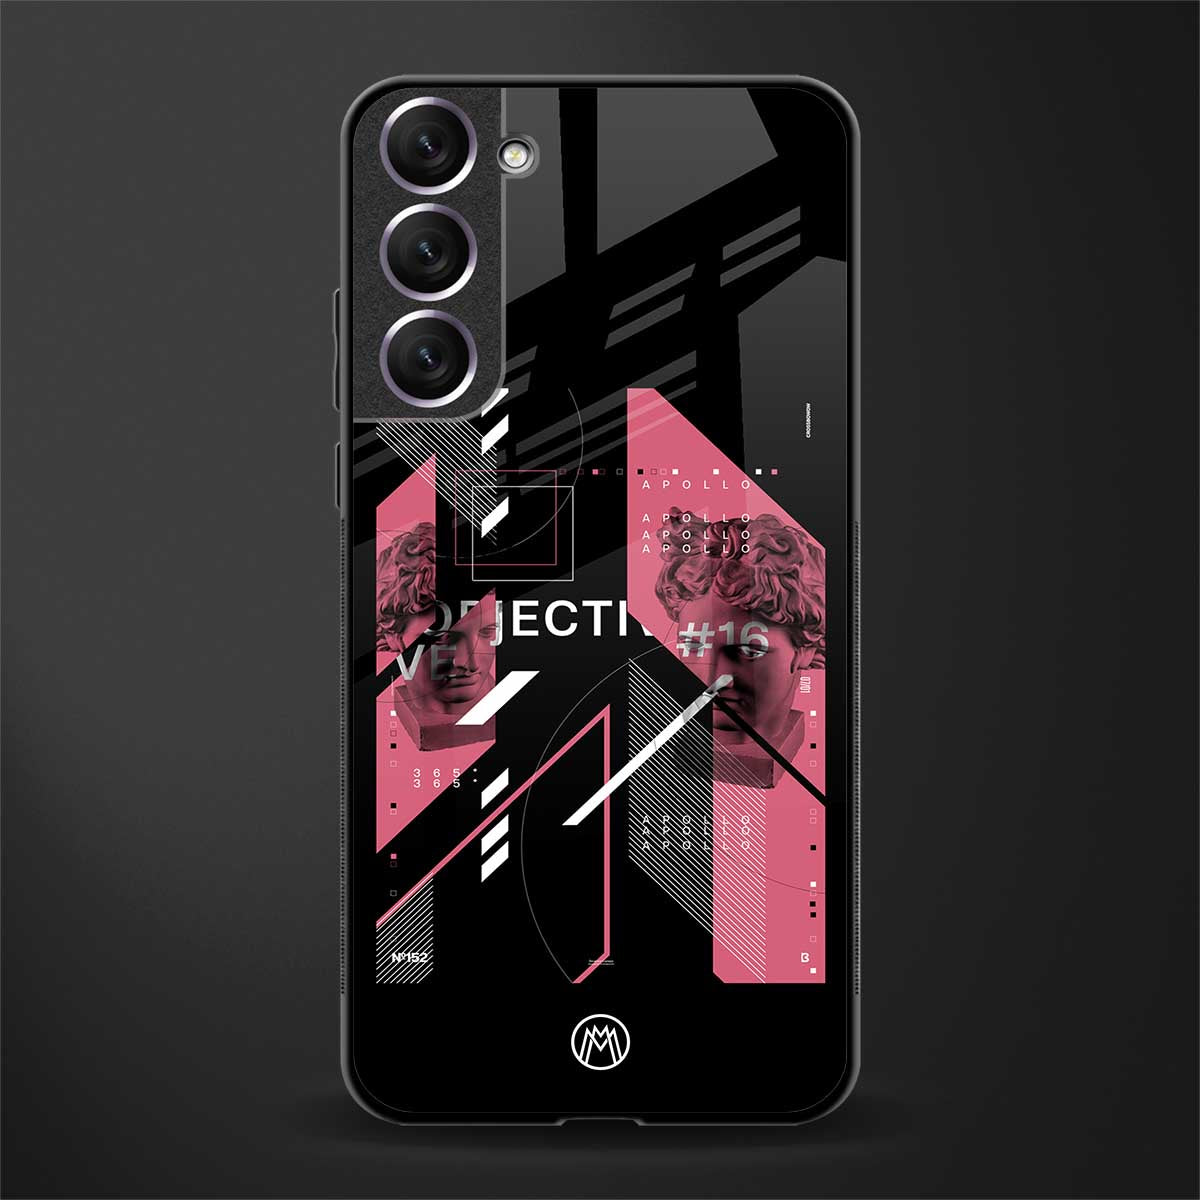 apollo project aesthetic pink and black glass case for samsung galaxy s21 fe 5g image